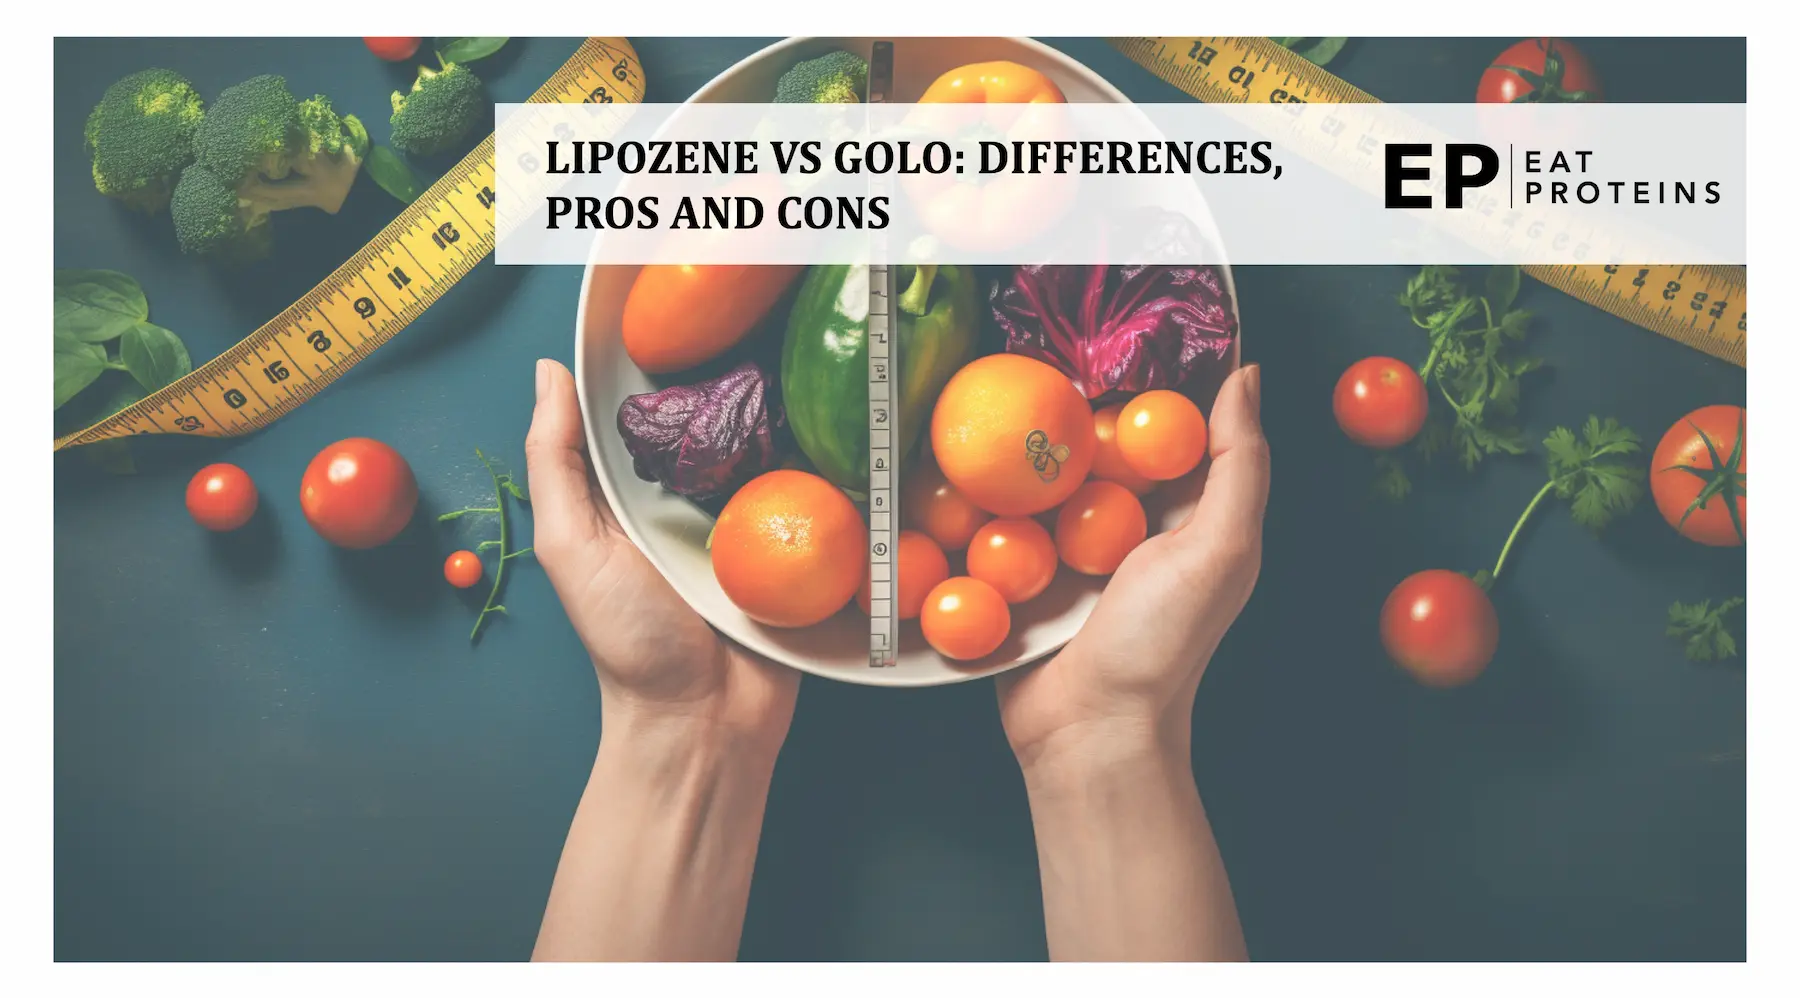 pros, cons, and differences between GOLO and lipozene